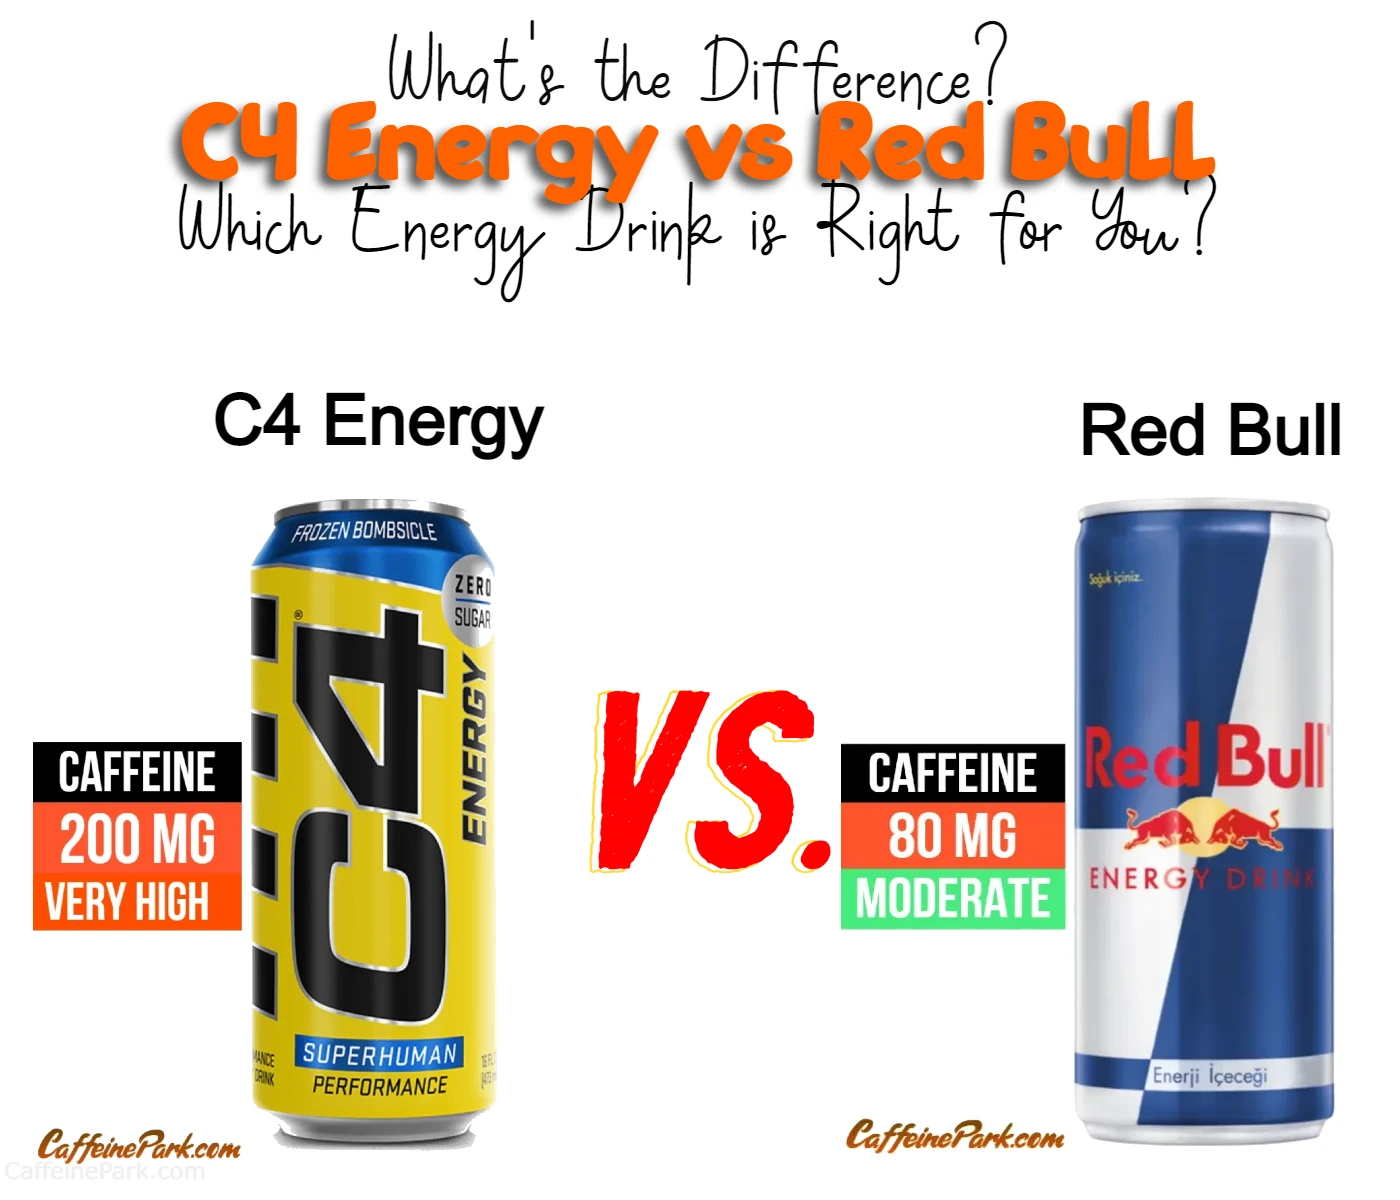 C4 Energy Drink vs. Red What's the Difference?